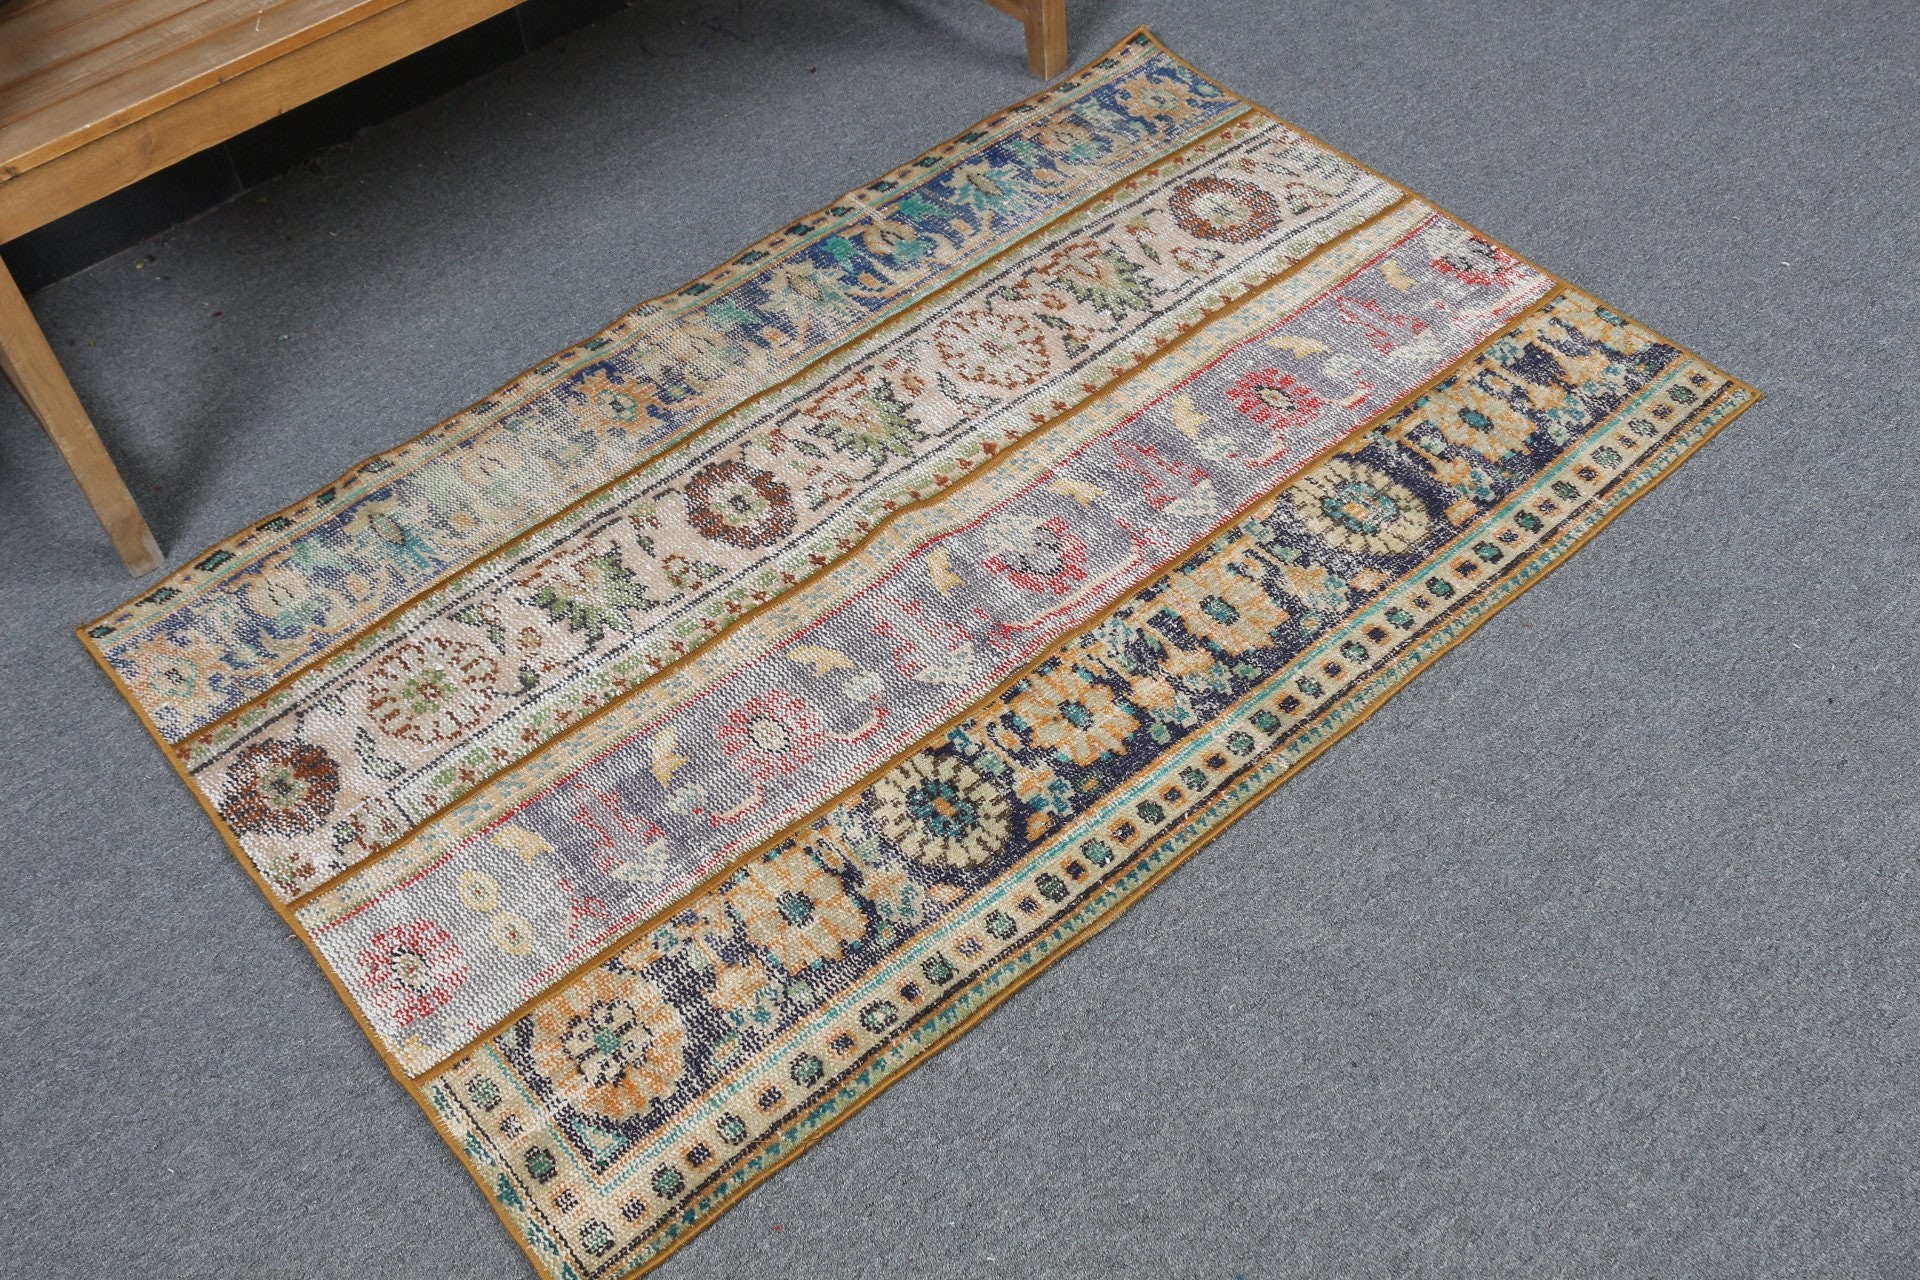 Kitchen Rugs, Rugs for Entry, 2.9x4.6 ft Small Rugs, Wool Rug, Entry Rug, Beige Cool Rug, Vintage Rug, Old Rugs, Antique Rugs, Turkish Rugs